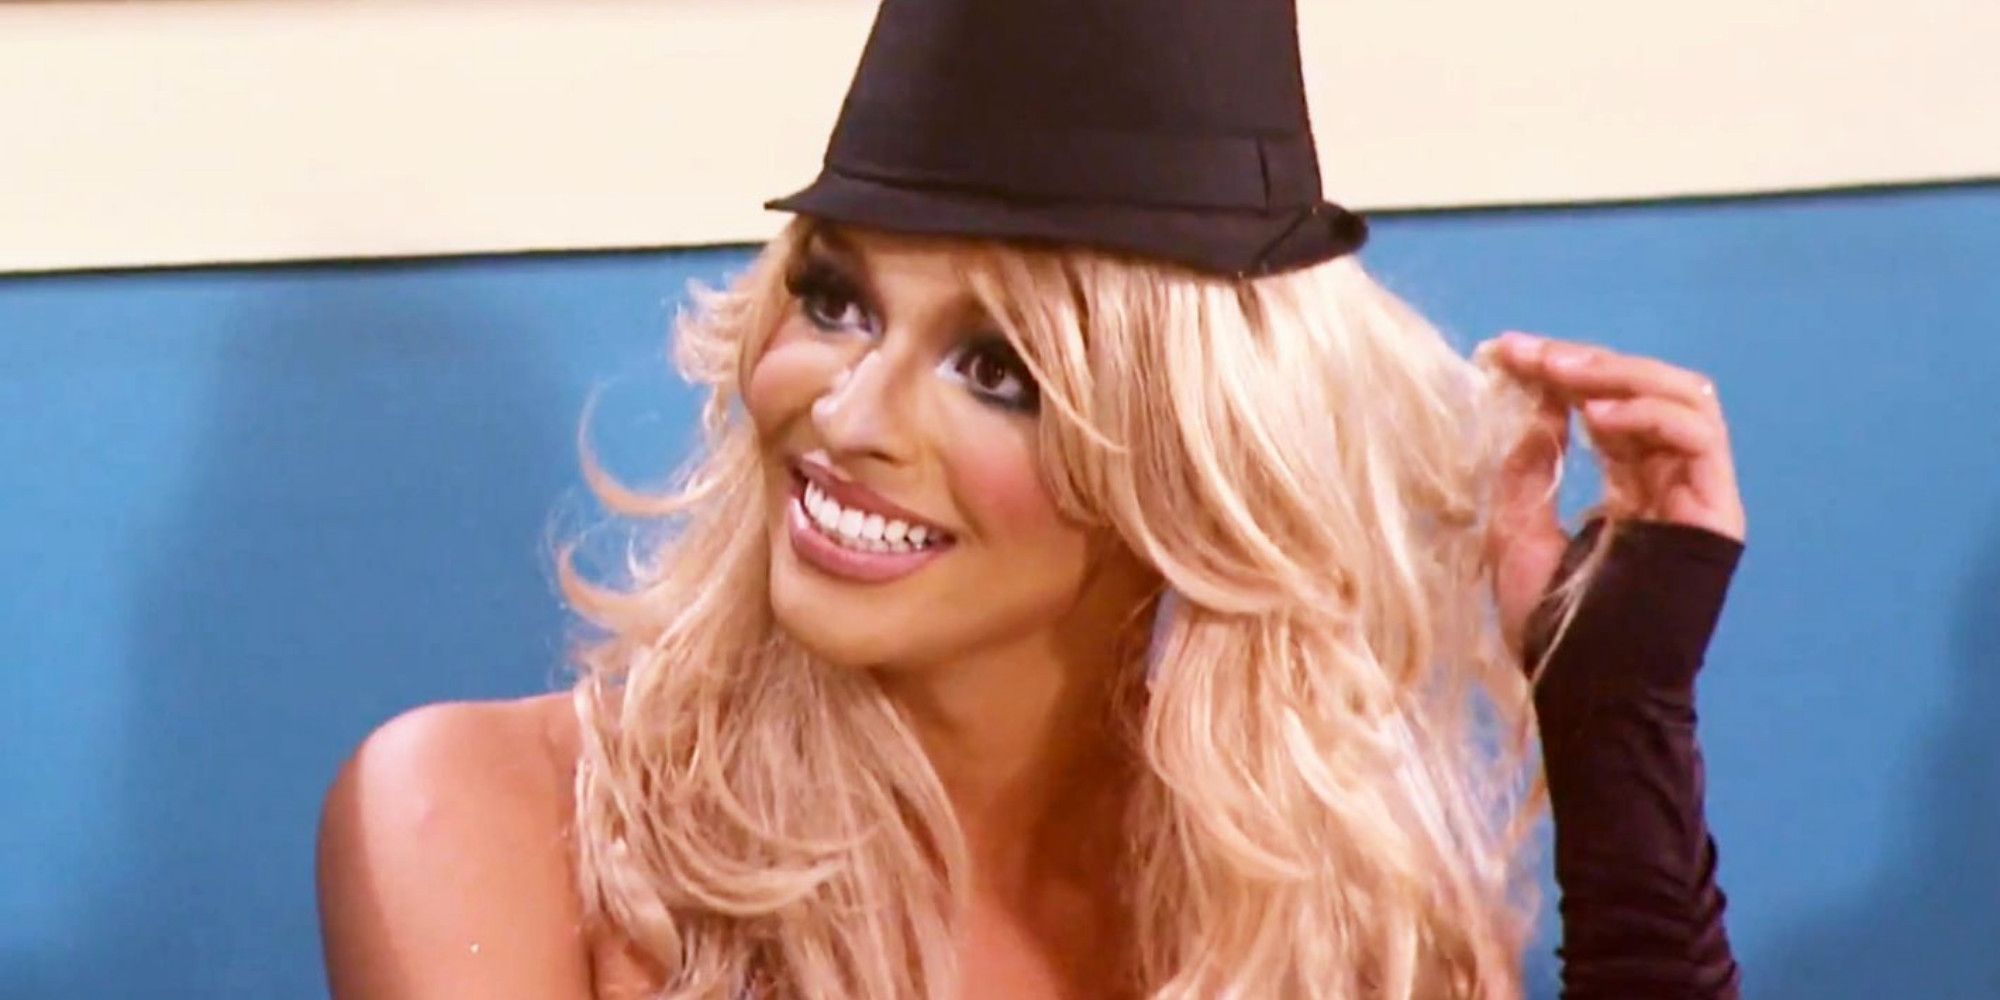 Drag queen Tatianna portrays Britney Spears in the Snatch Game on RuPaul's Drag Race